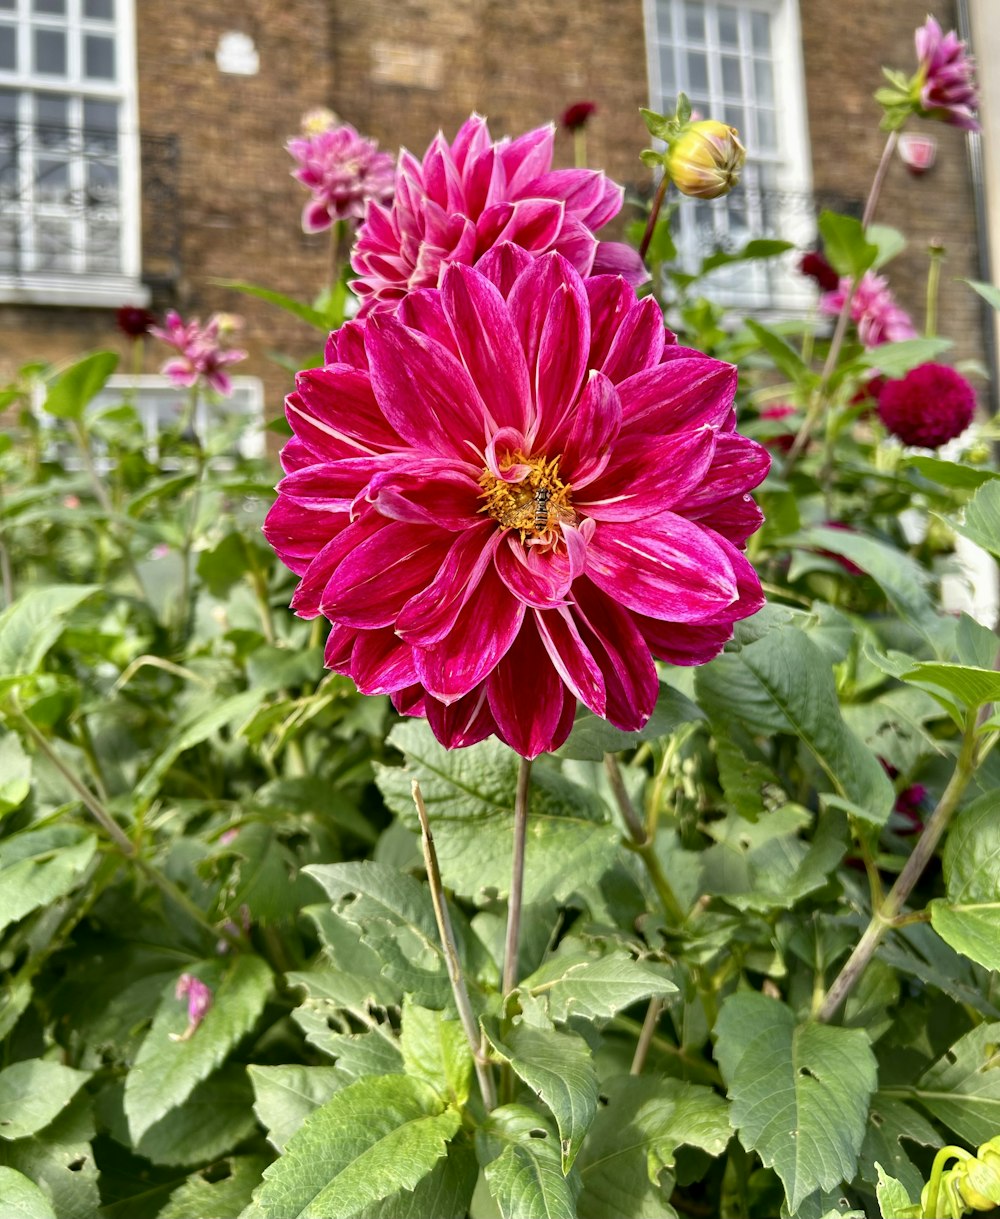 a large pink flower in front of a brick building